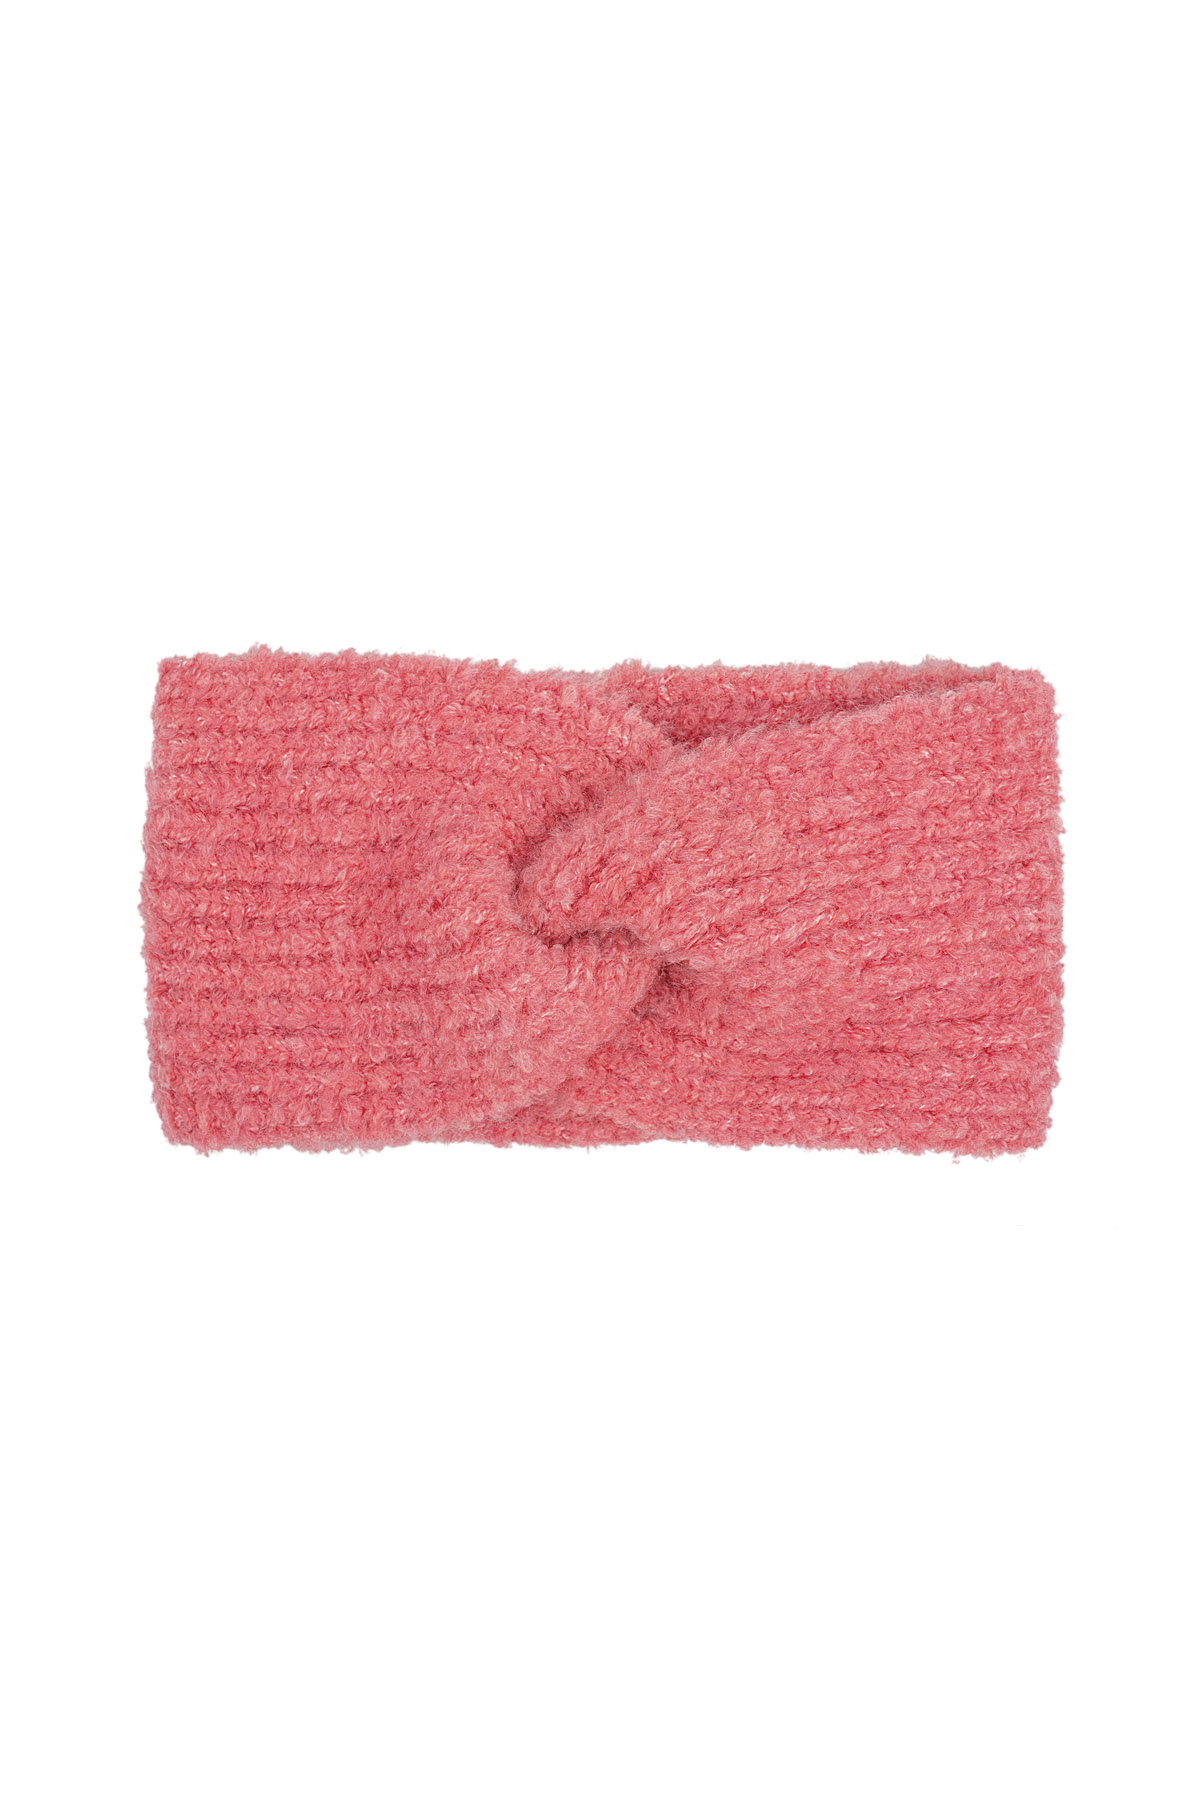 Knitted head warmer basic - pink h5 